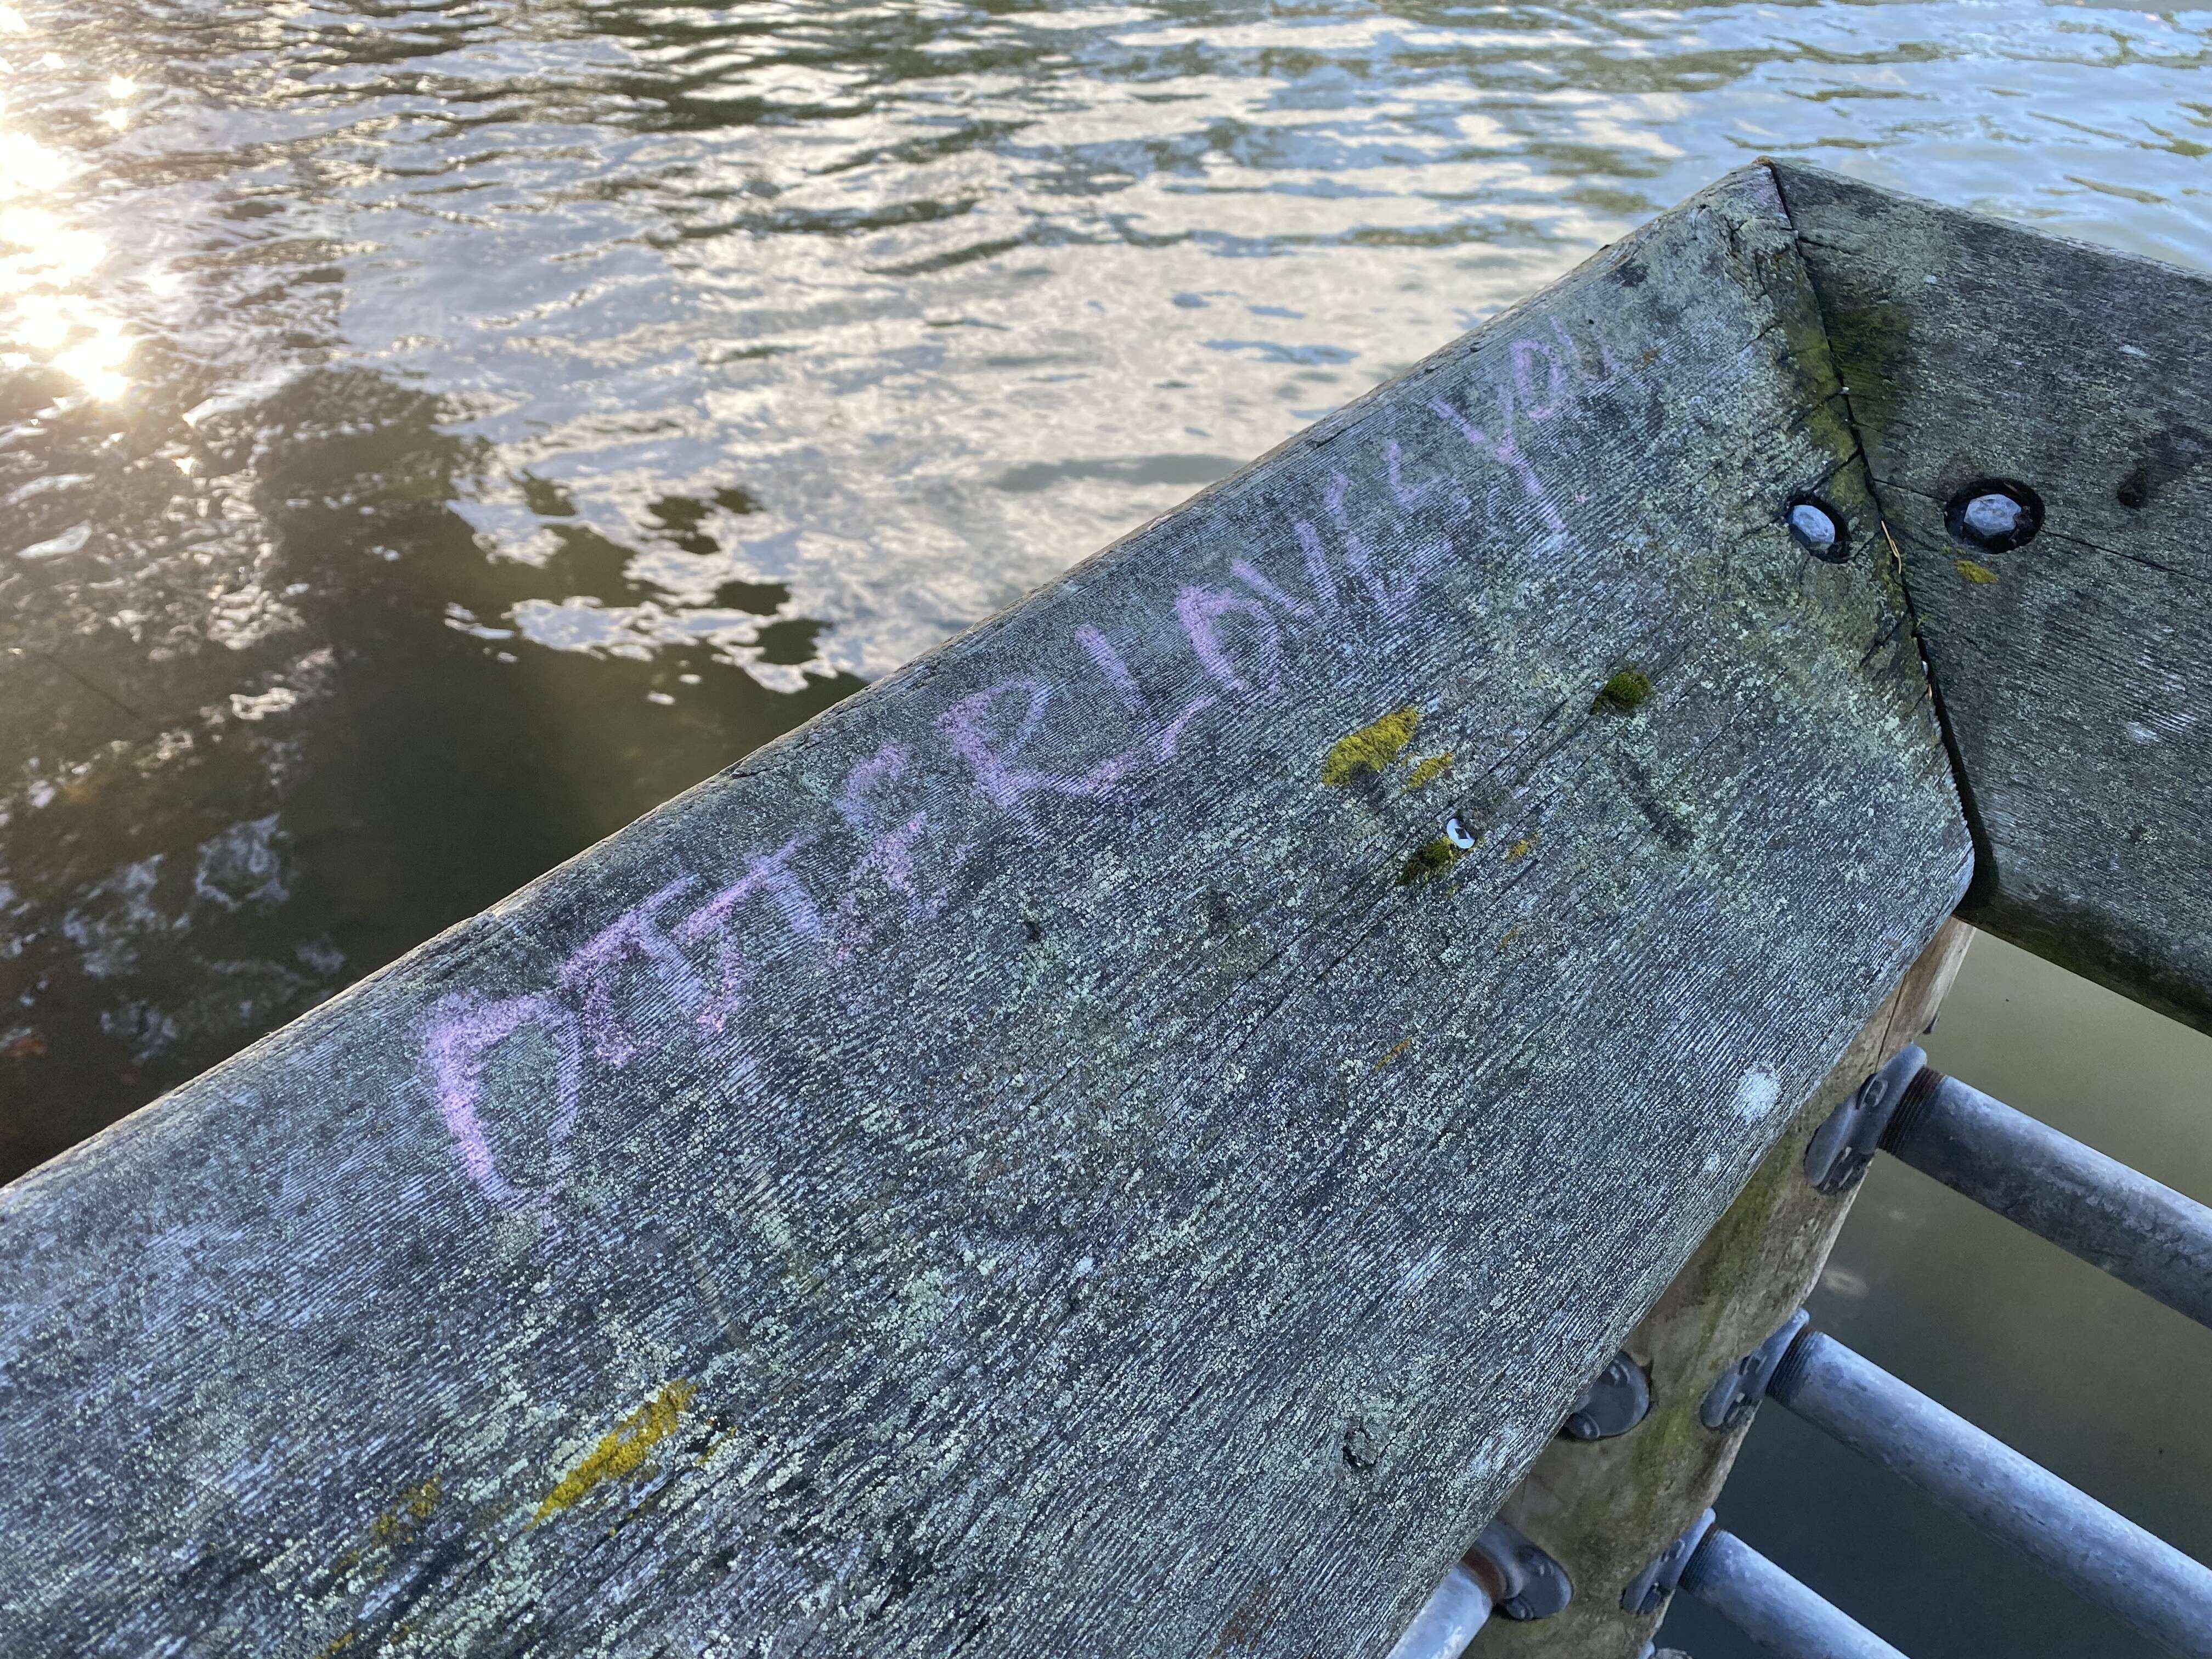 Graffiti on a ledge that reads "Otter loves you" along the Gorge Waterway in Saanich, Vancouver Island